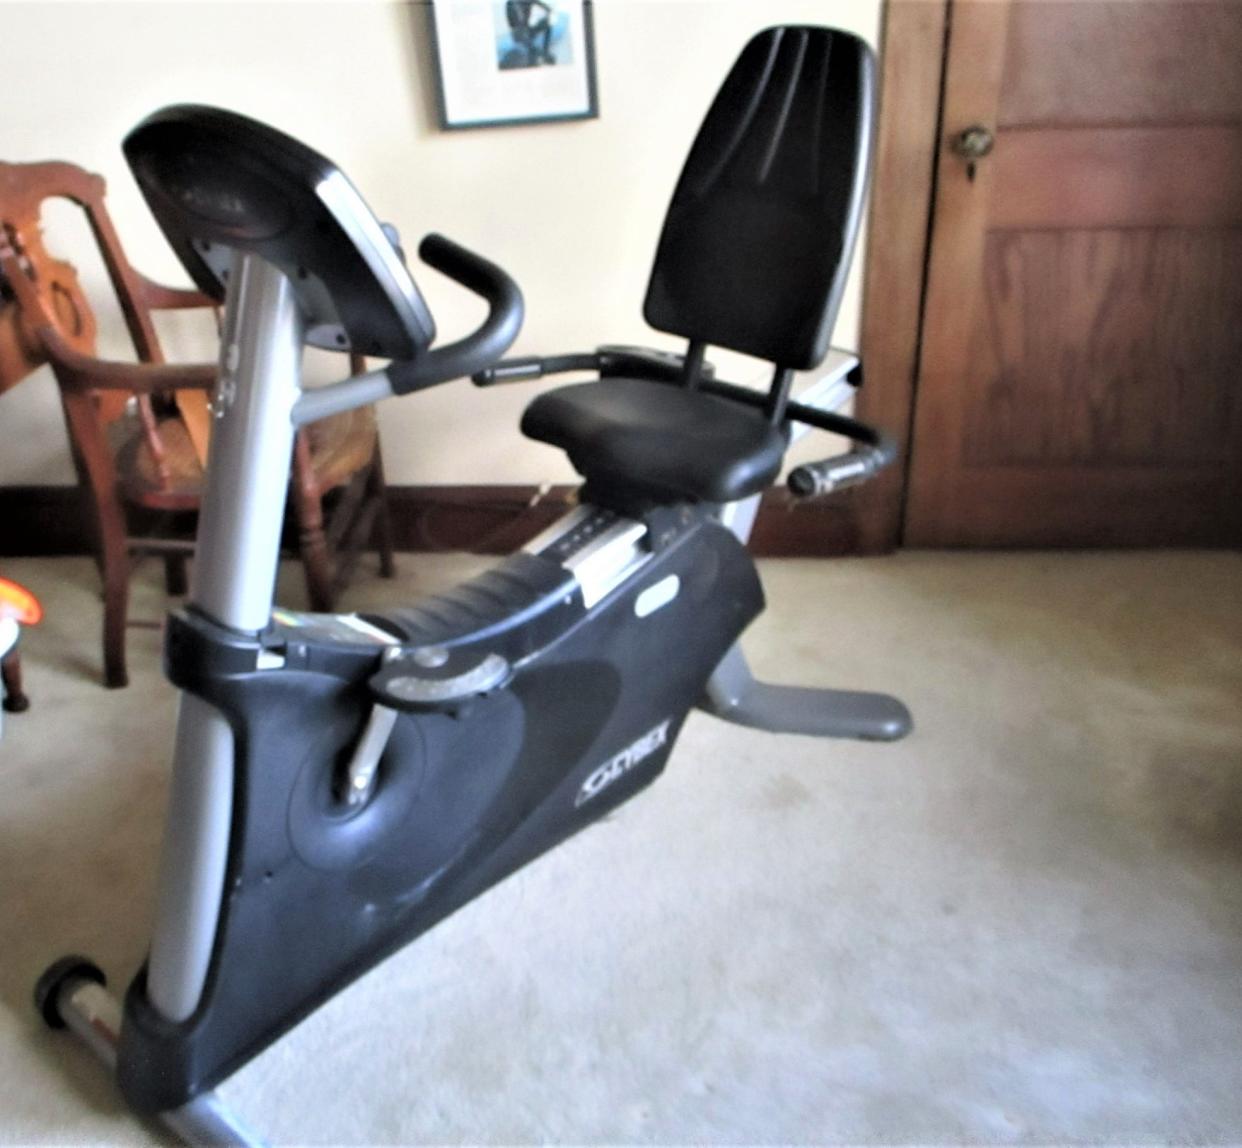 A friend loaned this Cybex Sigma recumbent bike to aid in his recuperation from a broken shoulder and a massive staph infection. It's one of a few "pedaled" devices helping him strengthen his legs and joints.